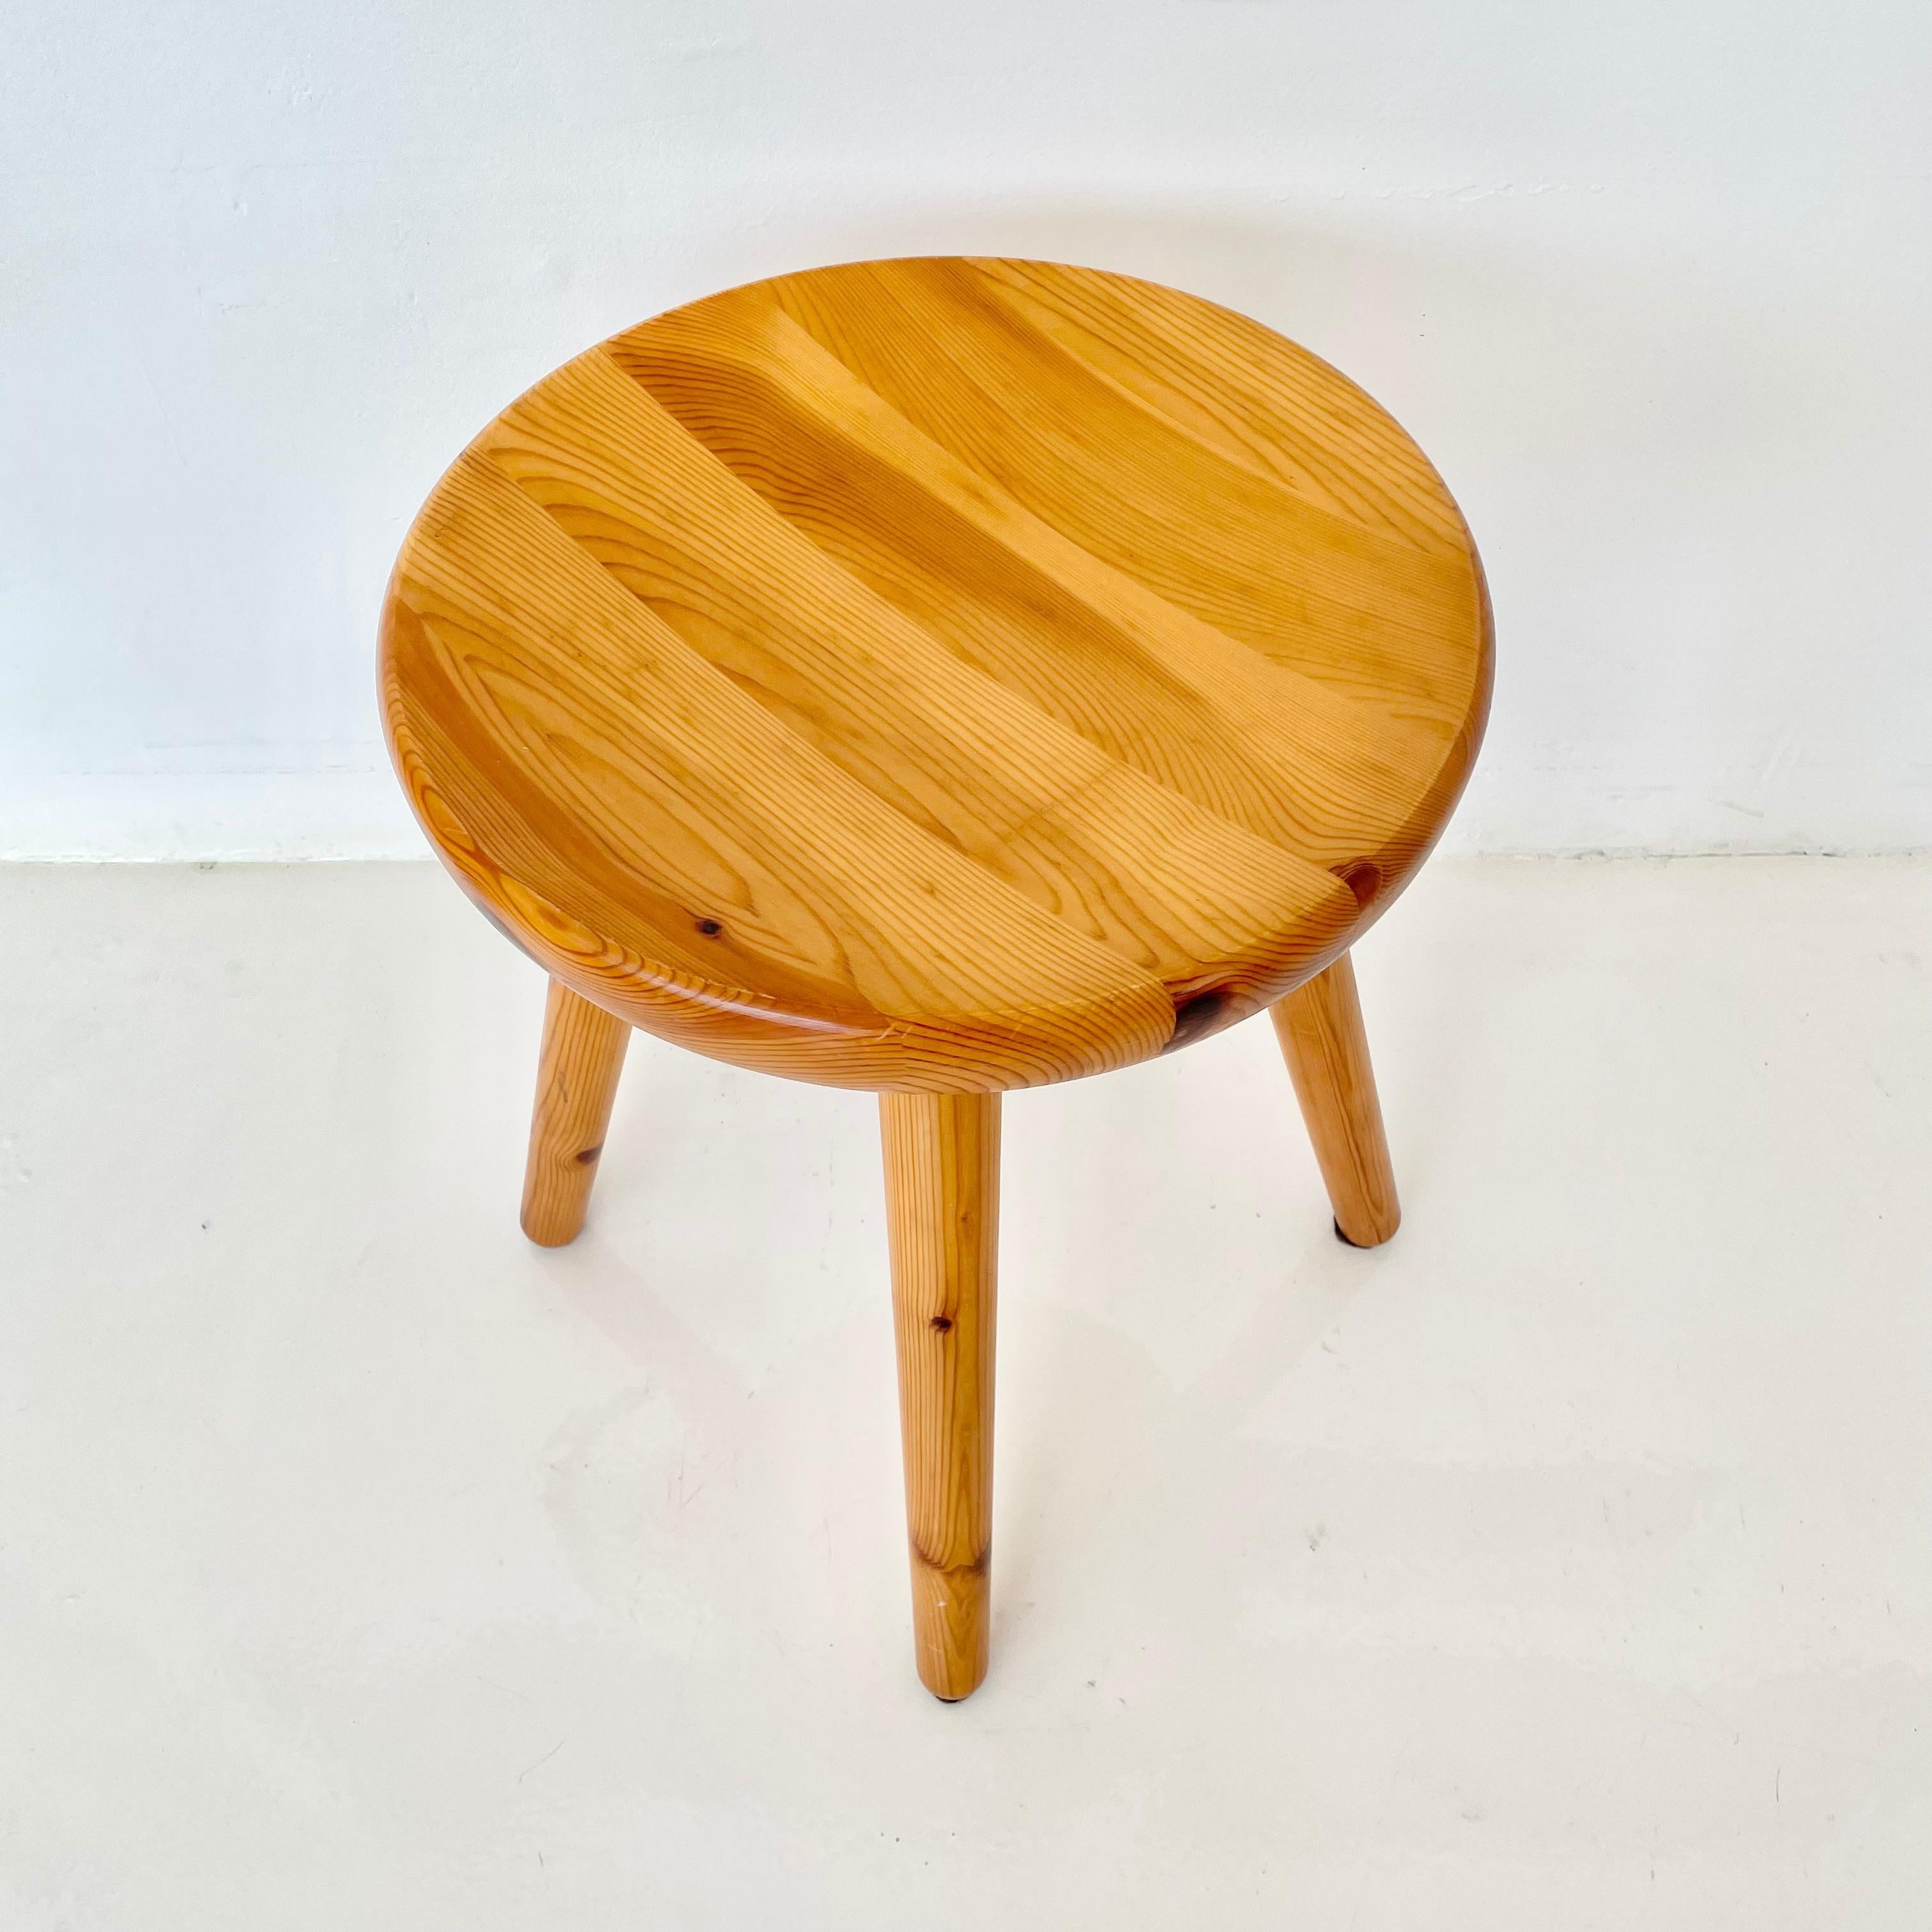 Collectible pine stools in the style of Charlotte Perriand. No screws or hardware used on stools. Beautiful joinery and grain details. Four available. Priced individually. Very good condition with slight wear and excellent patina.